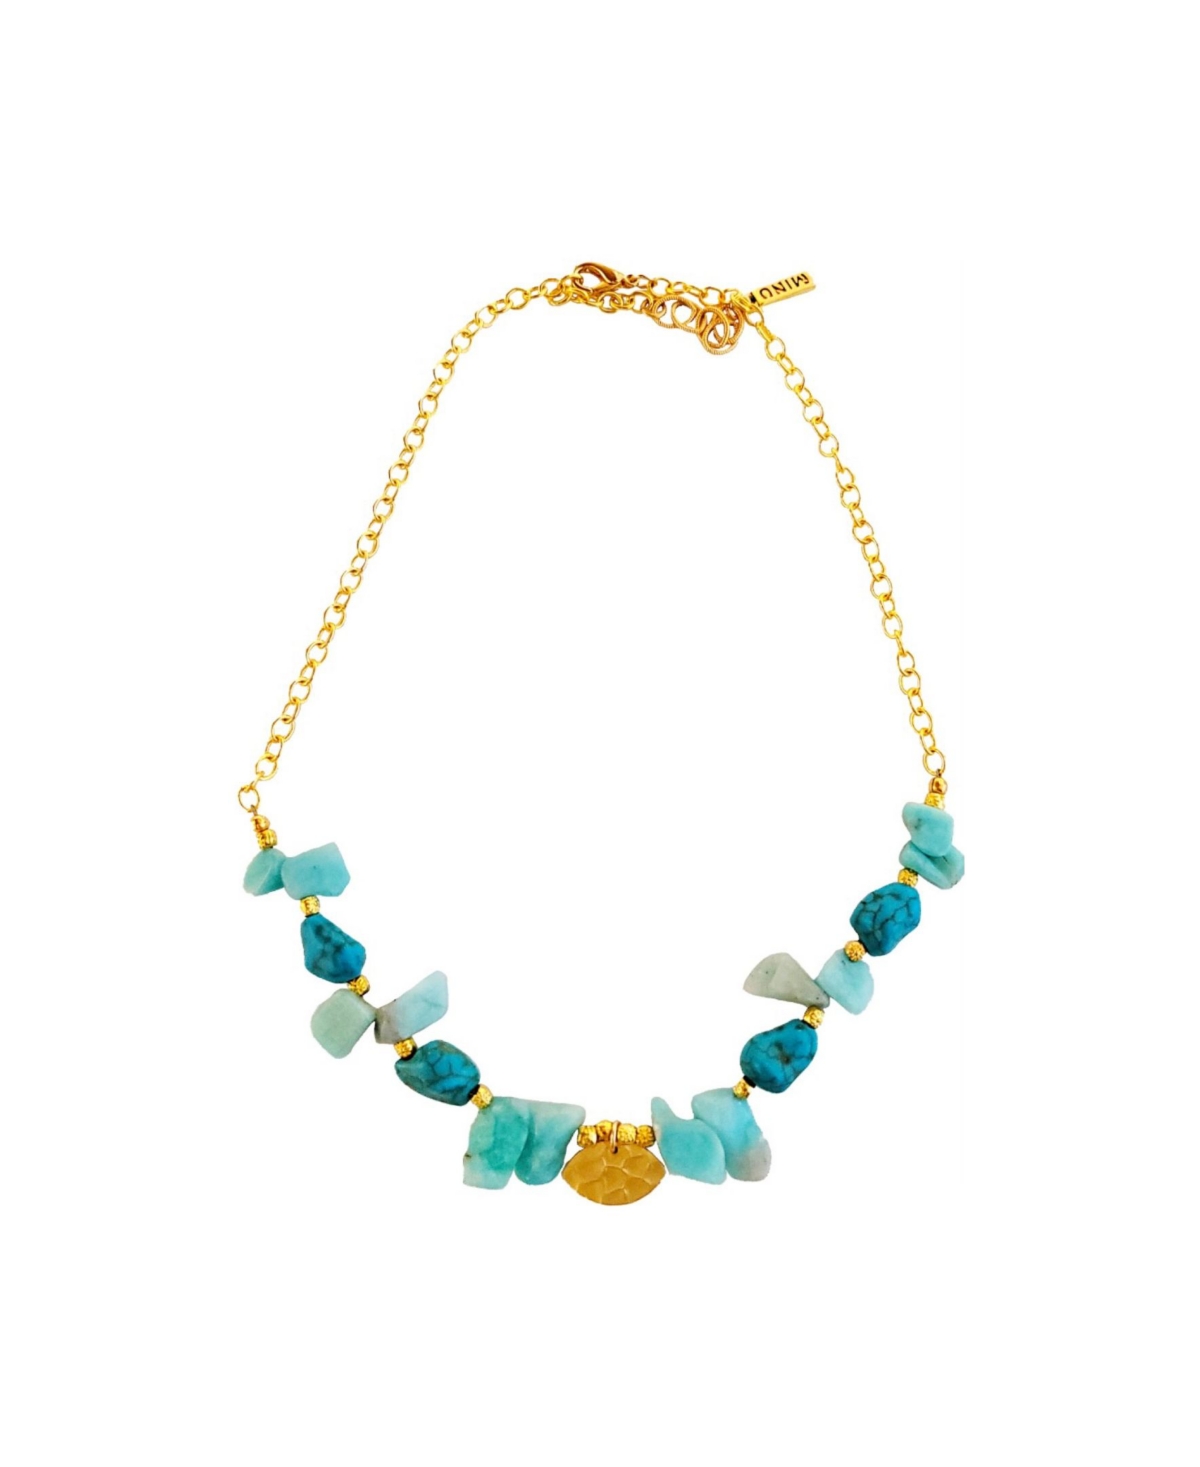 Minu Jewels Women's Ain Necklace with Turquoise and Amazonite Stones